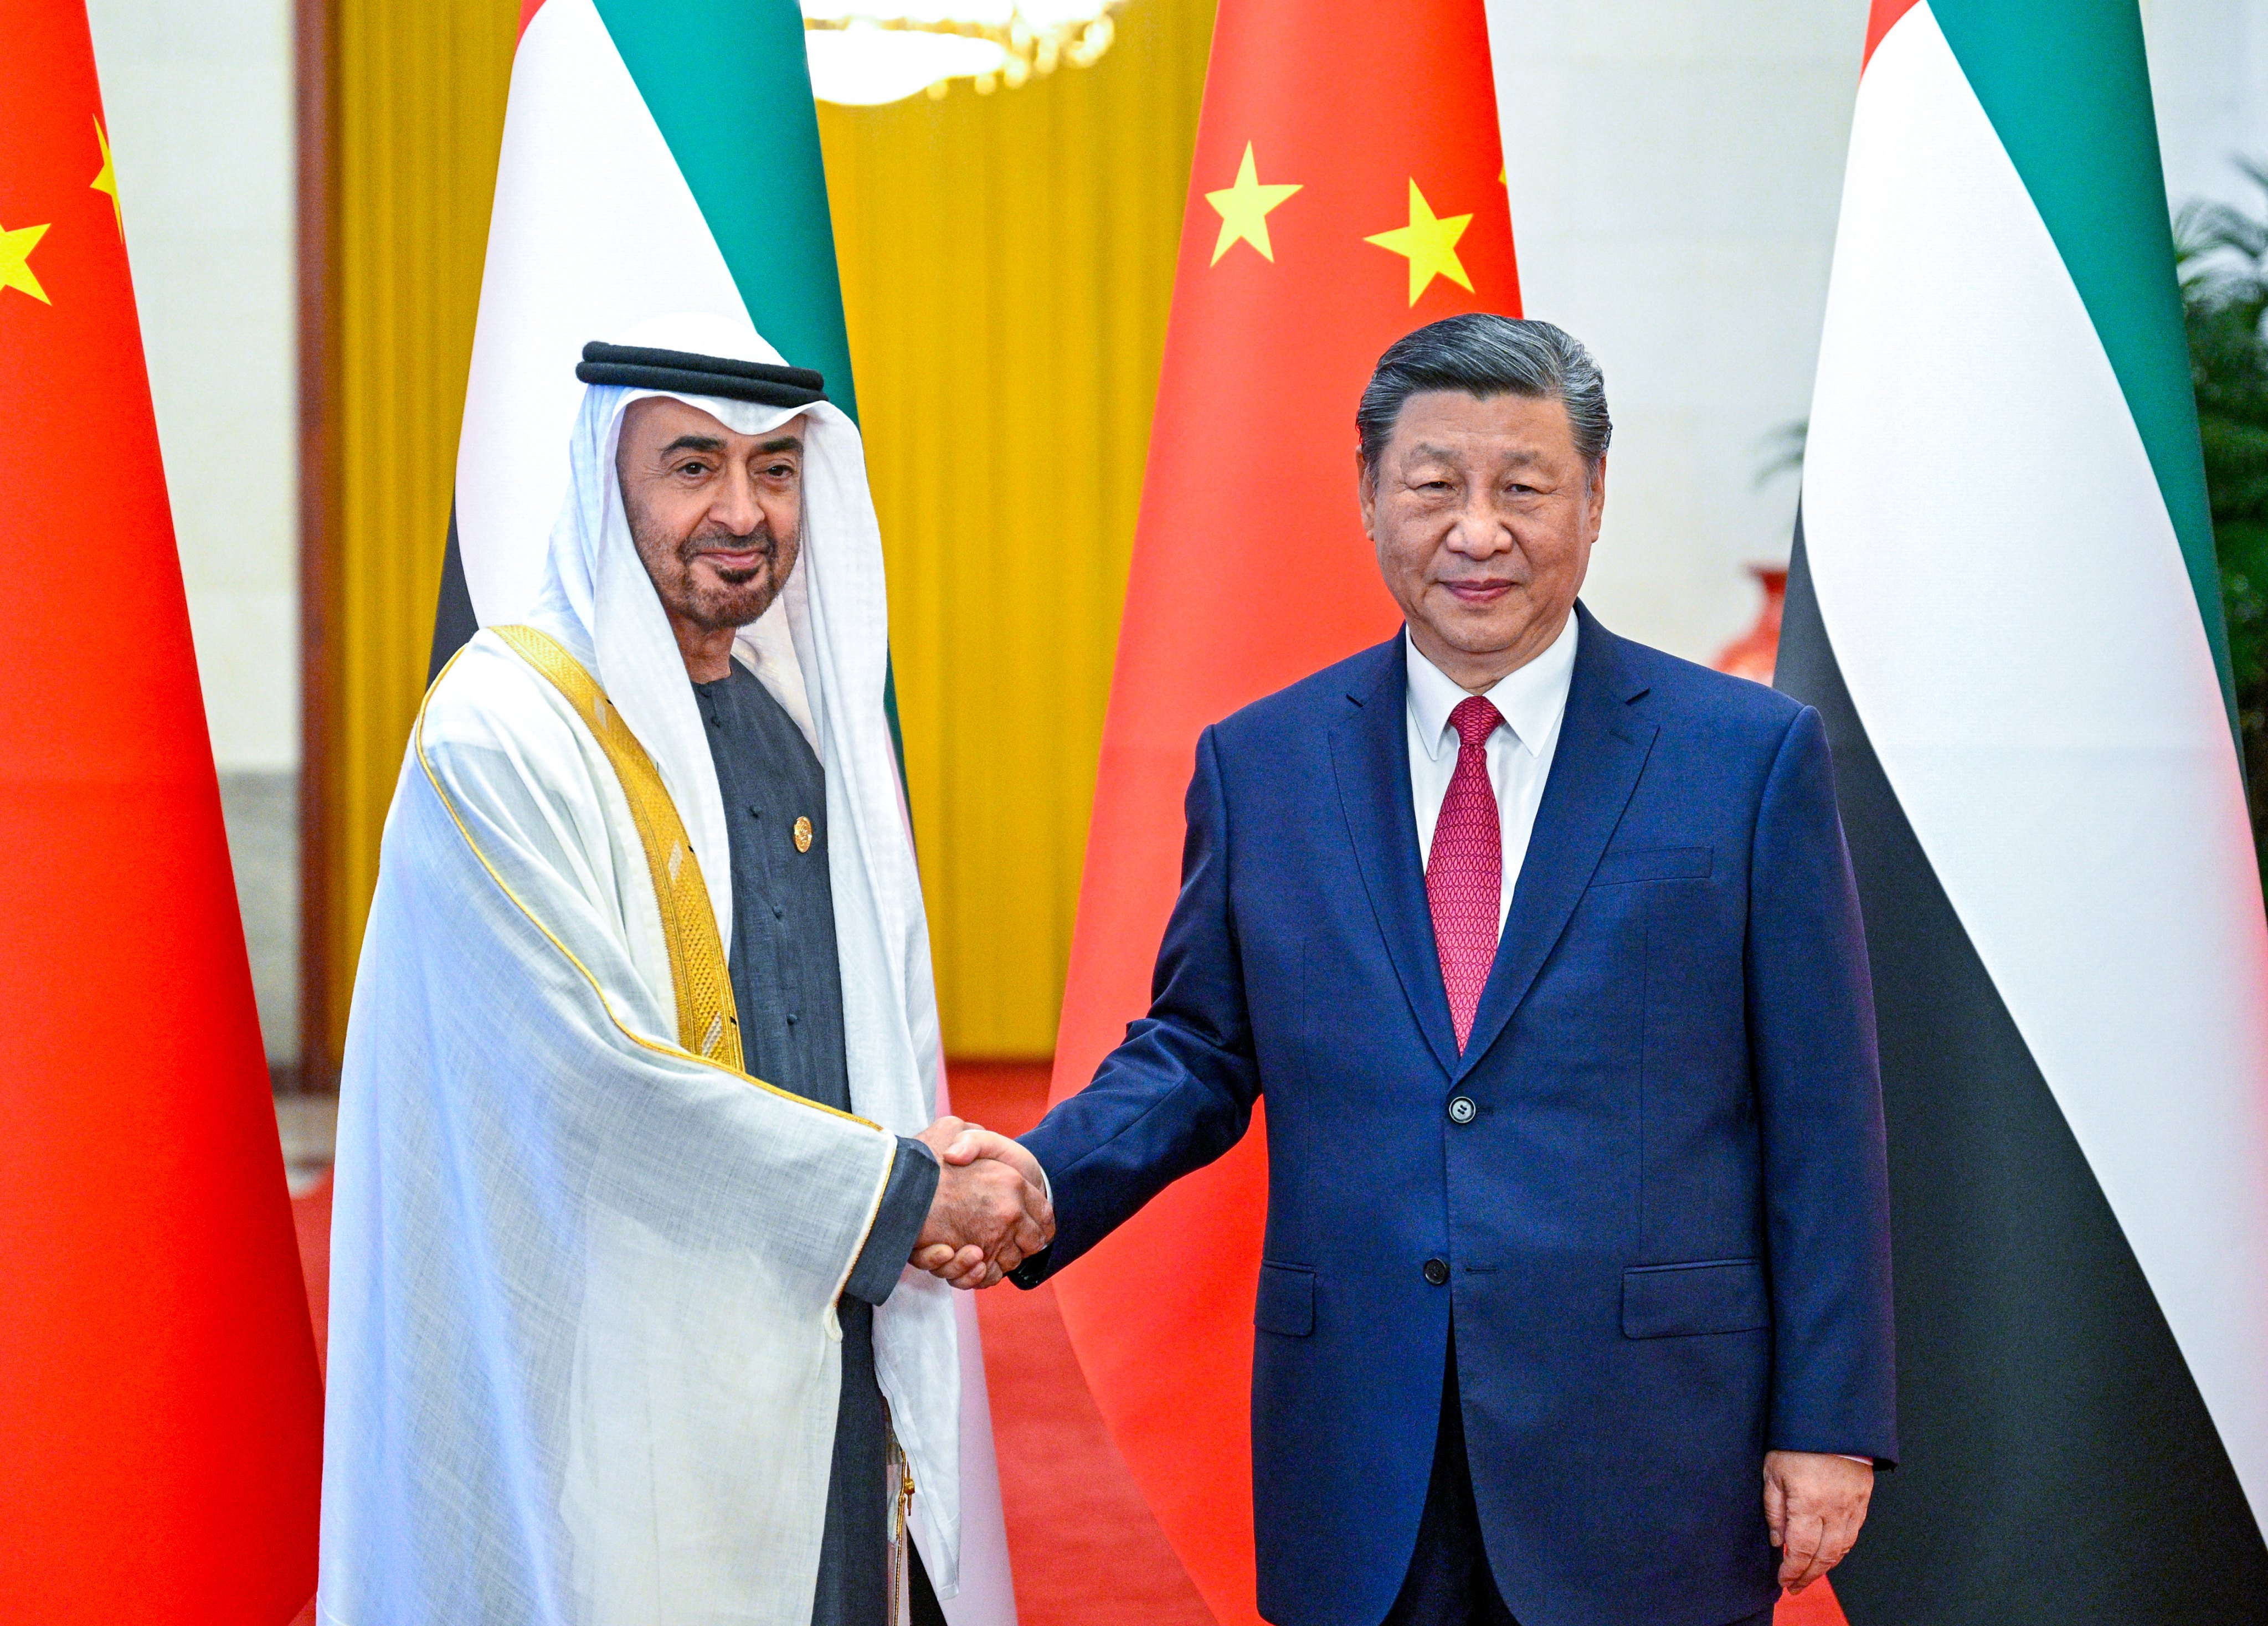 The UAE’s President Sheikh Mohamed bin Zayed Al Nahyan (left) and his Chinese counterpart Xi Jinping in Beijing on Thursday. Photo: Xinhua